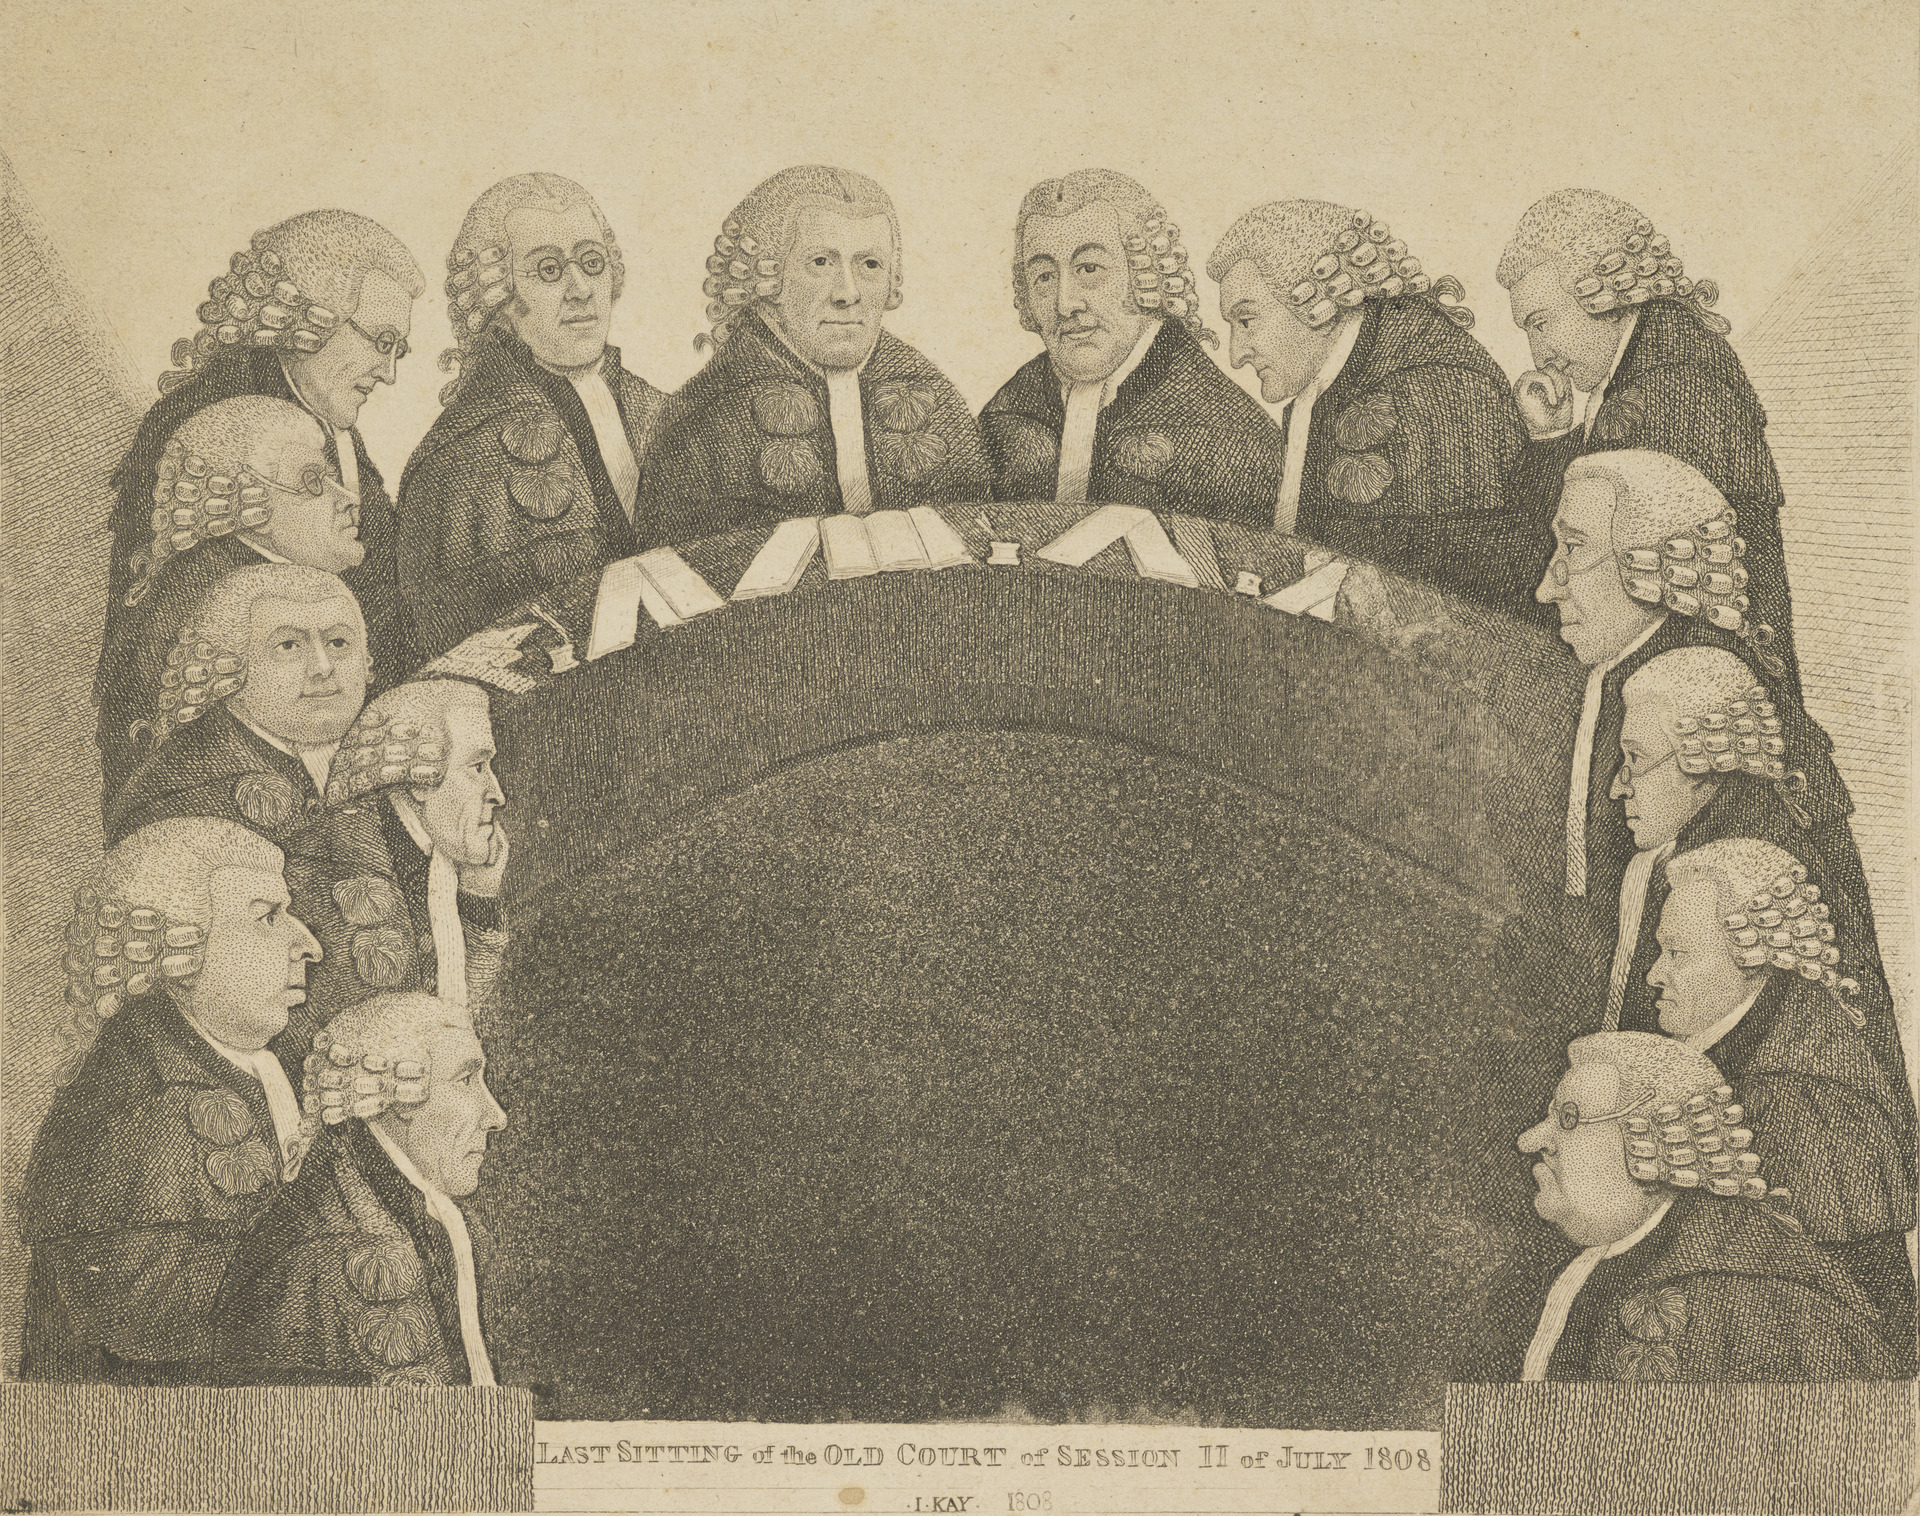 The Last sitting of the Old Court of Session